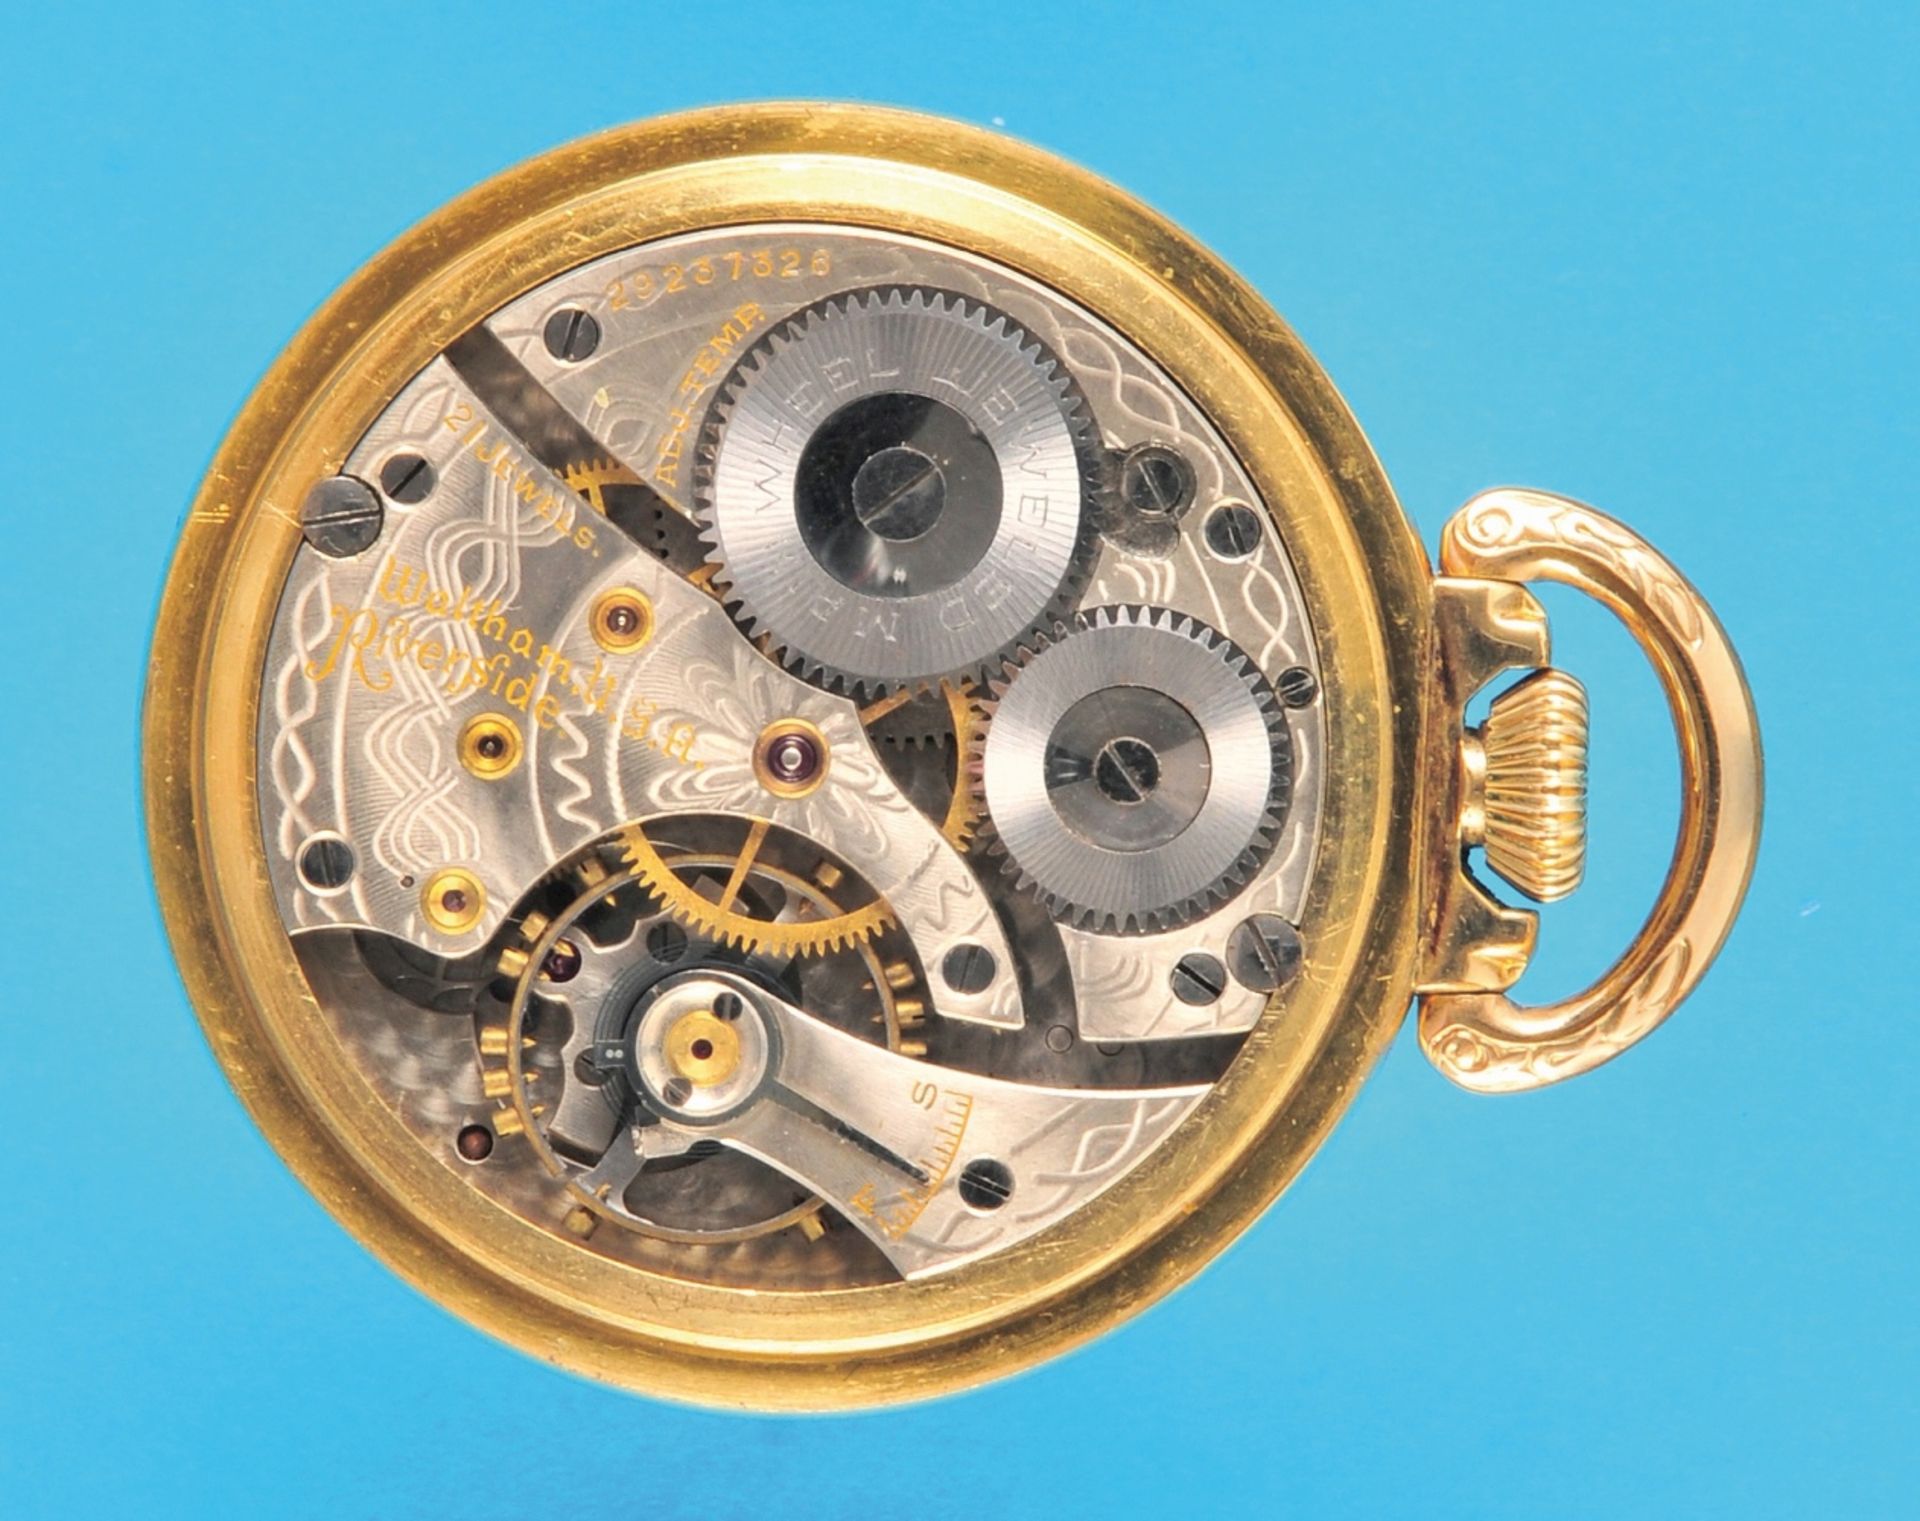 Waltham "Riverside", gold-plated pocket watch with screw top